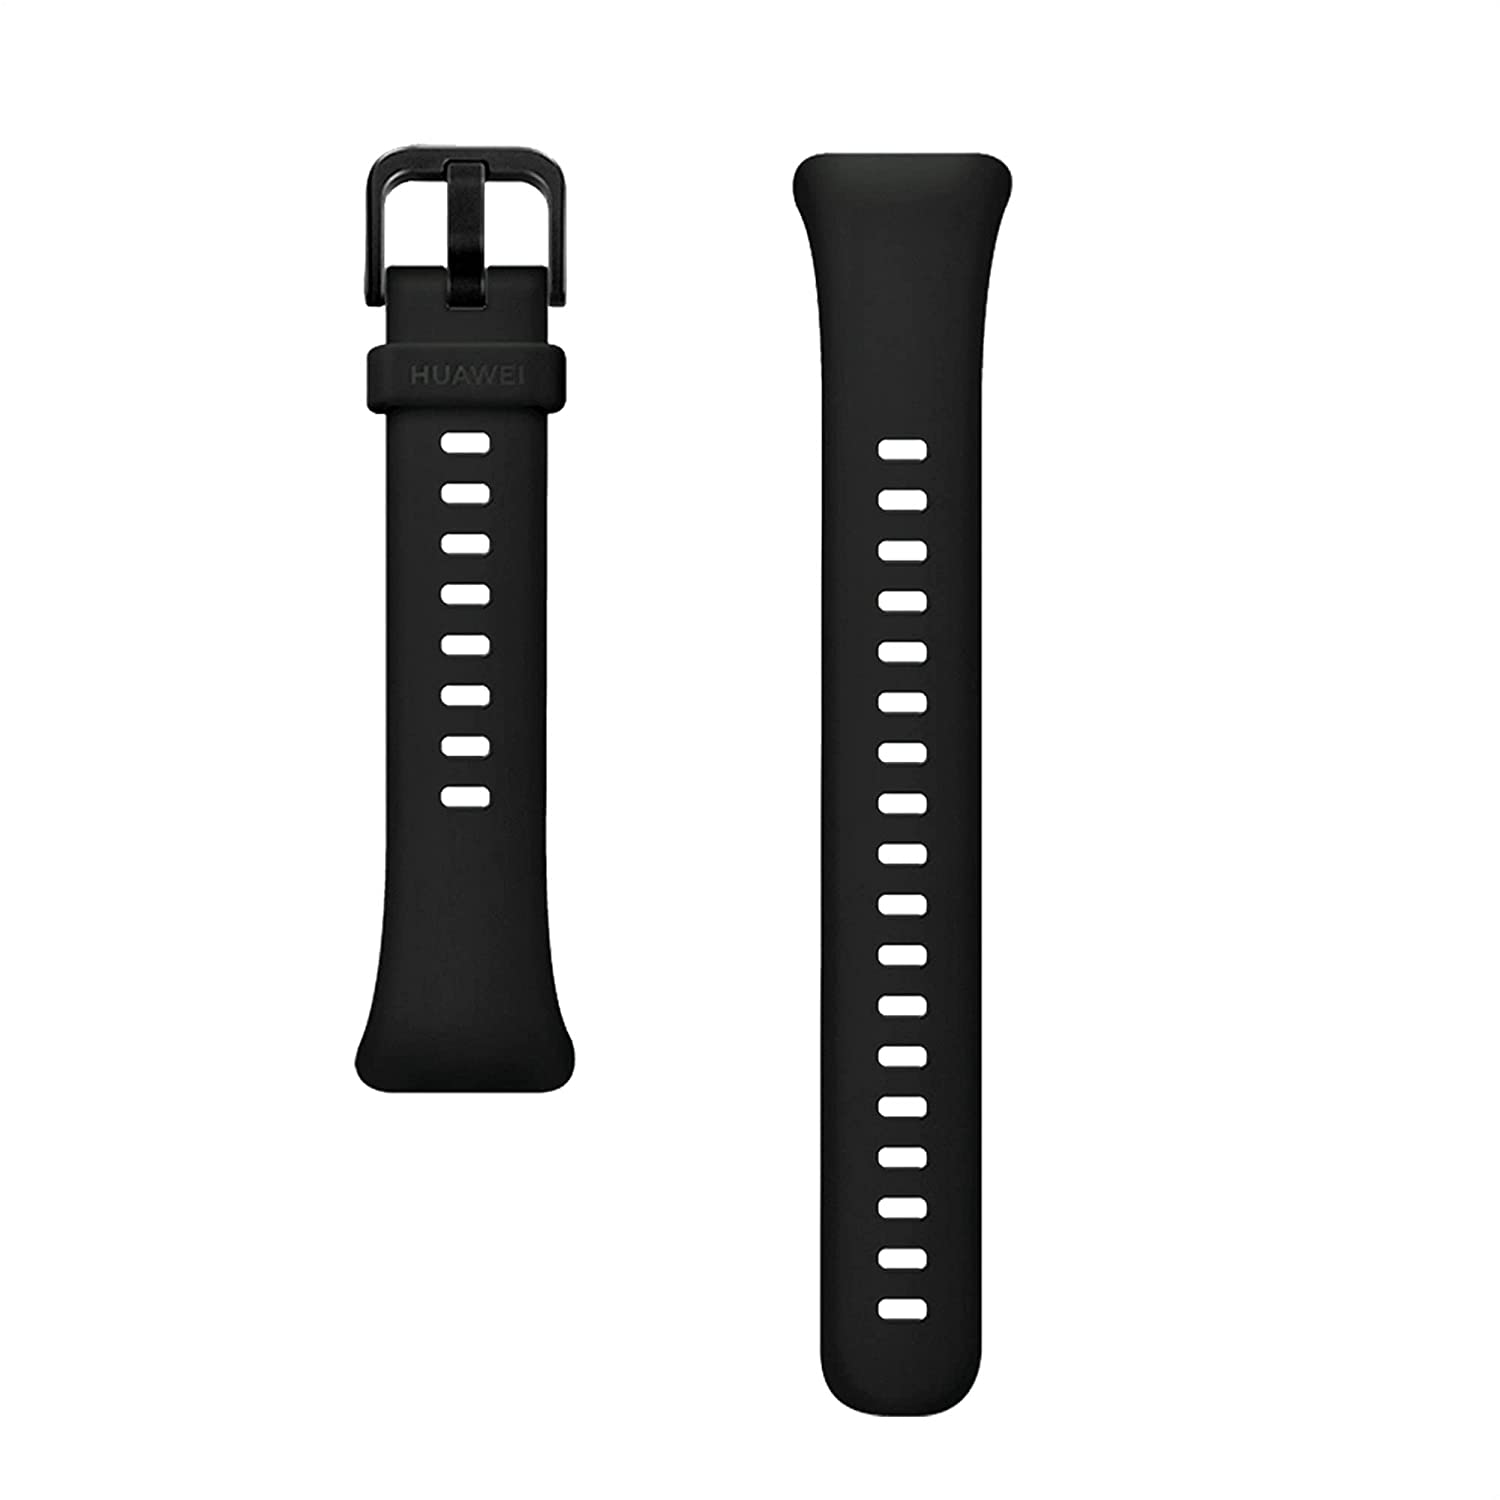 Huawei Band 6 Fitness Tracker Smartwatch Price In Bangladesh | Bdshop